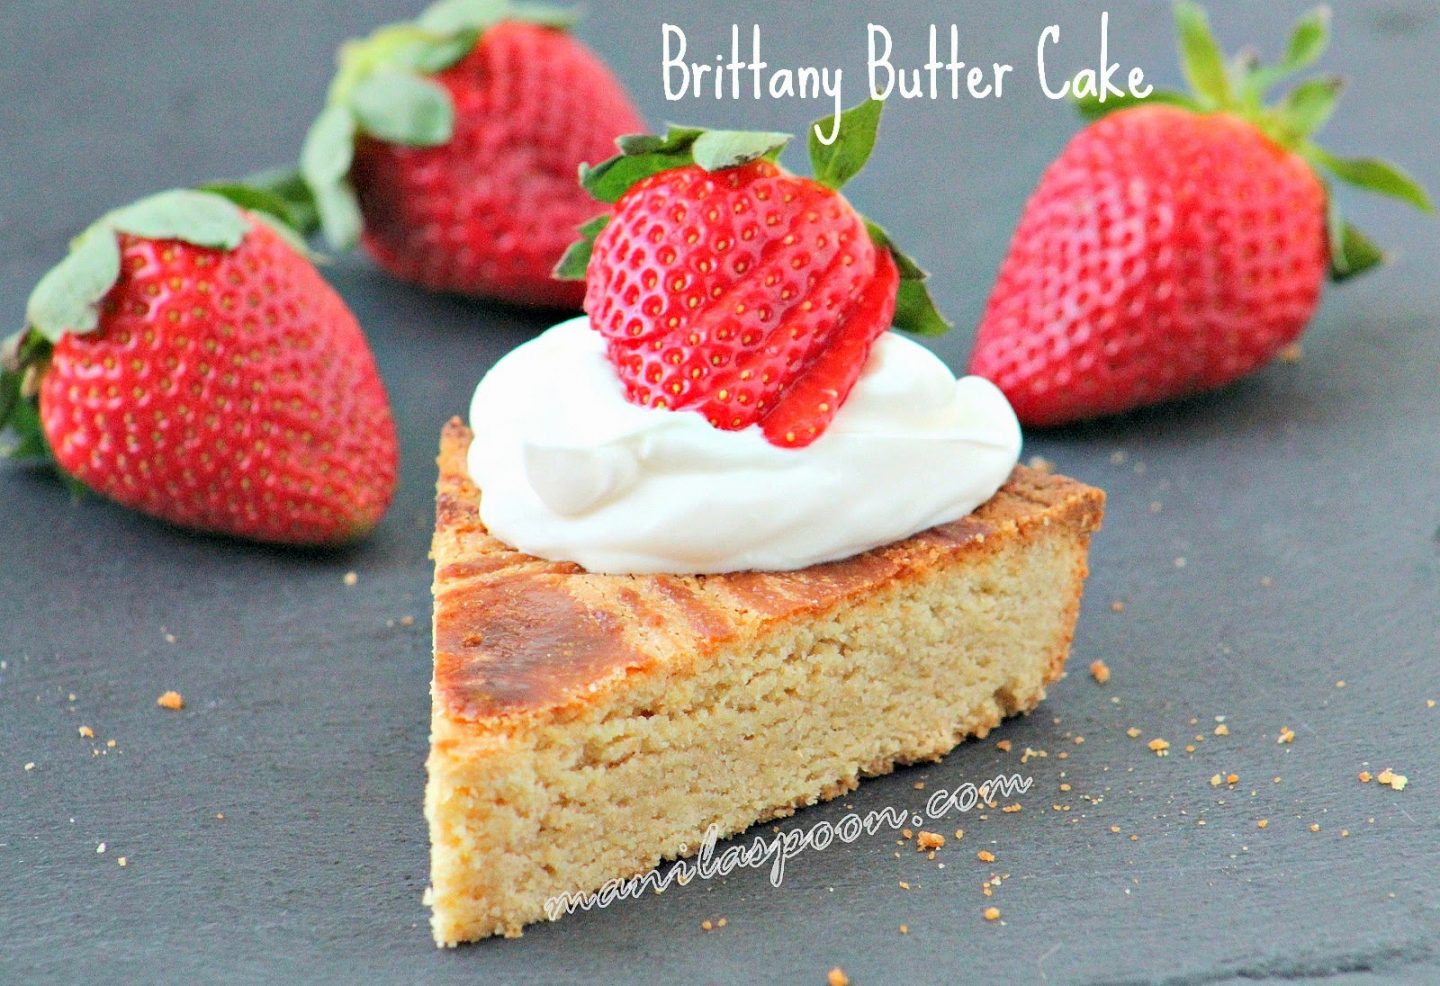 Brittany Butter Cake